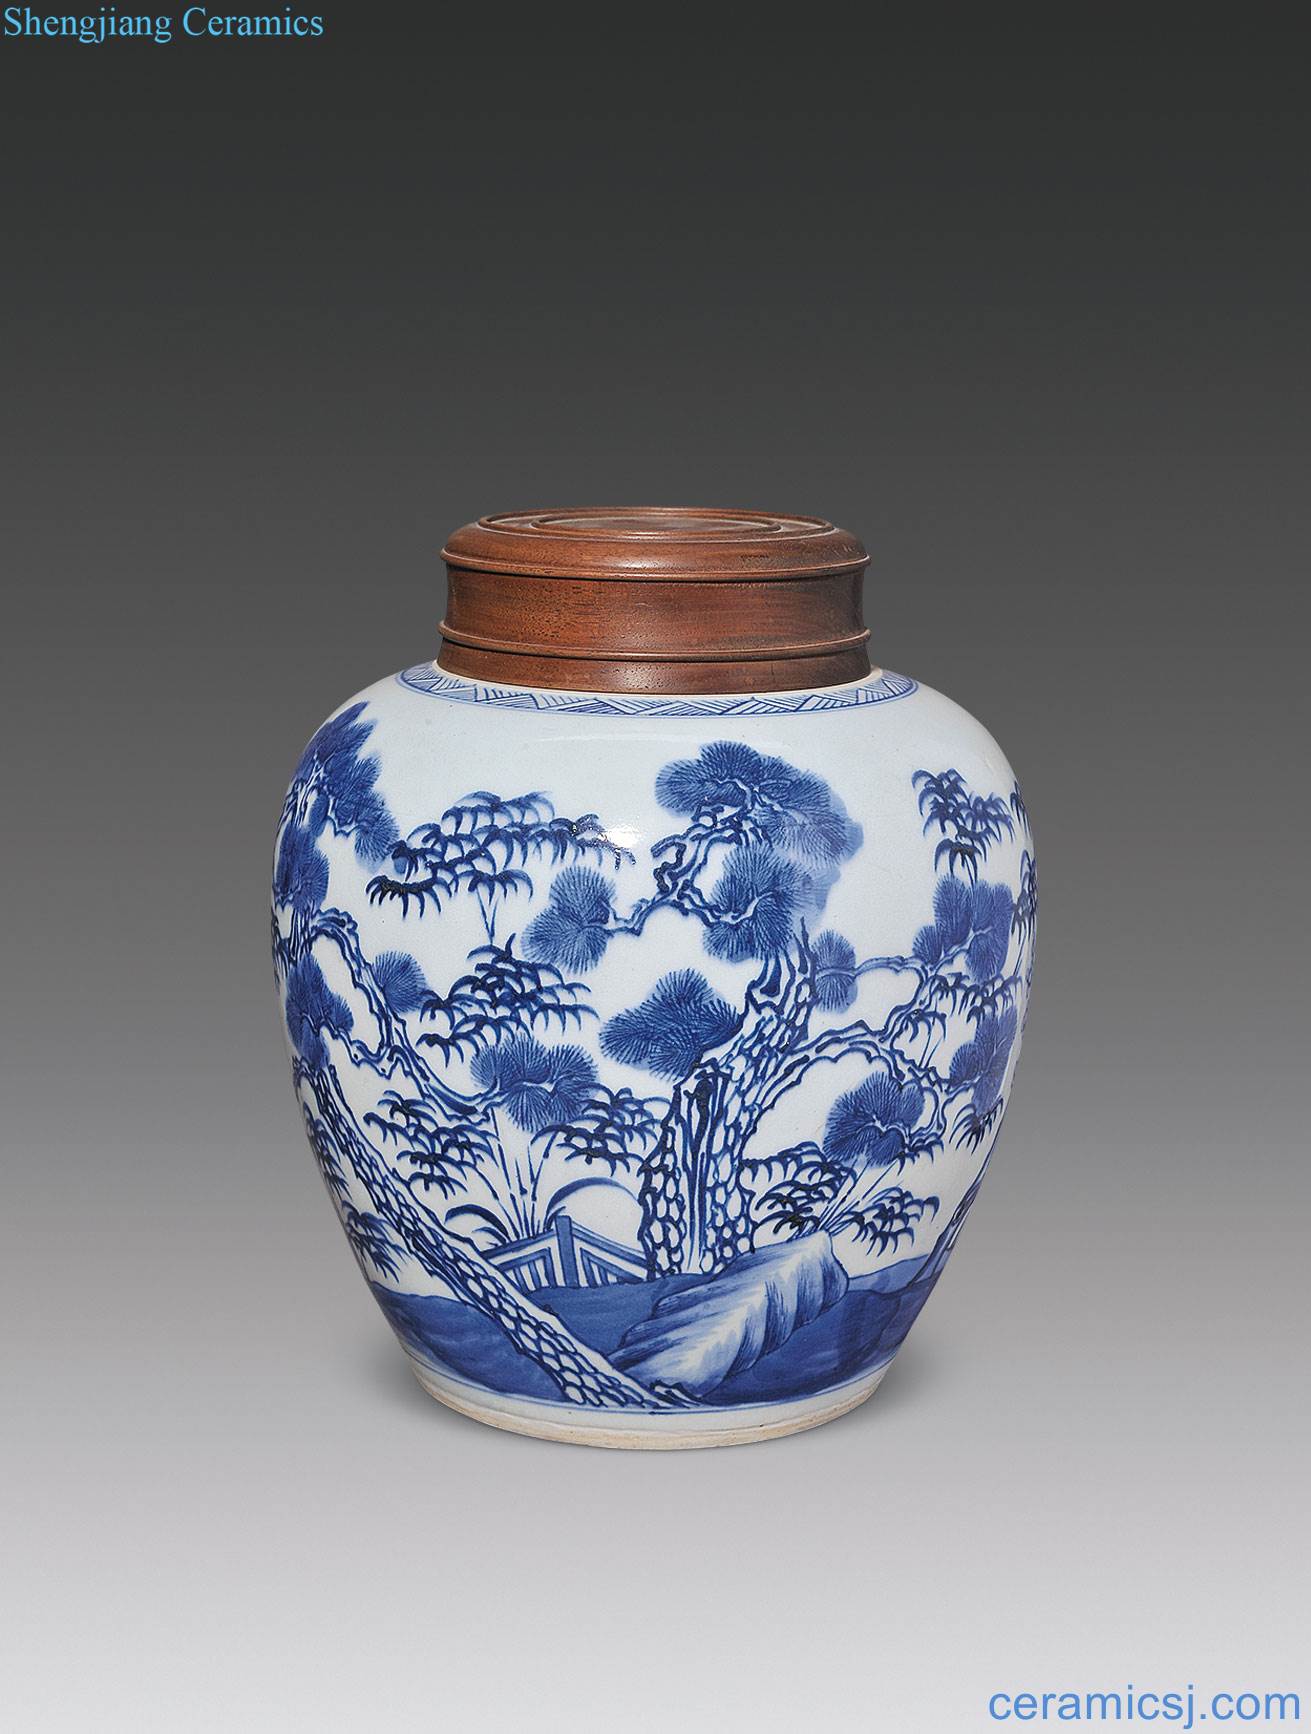 Qing yongzheng Blue and white, poetic figure cans